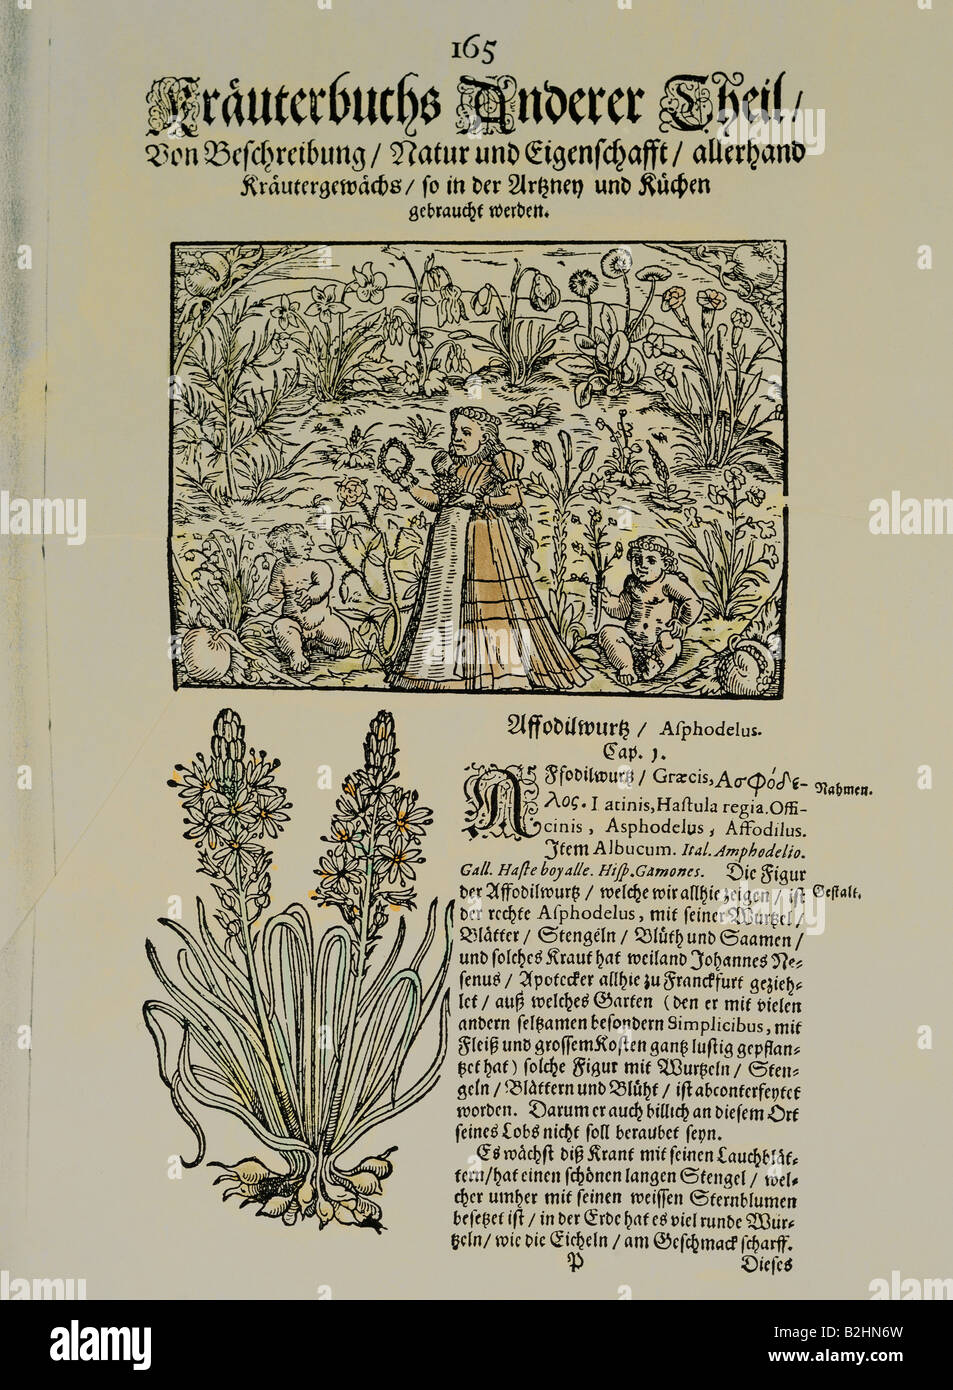 botany, herbs, Asphodelus, woodcut, coloured, from 'Kraeuterbuch' (Herbal book), by Adamus Lonicerus (1528 - 1586), revised by Peter Uffenbach, Frankfurt, Germany, 1679, page 165, private collection, Stock Photo